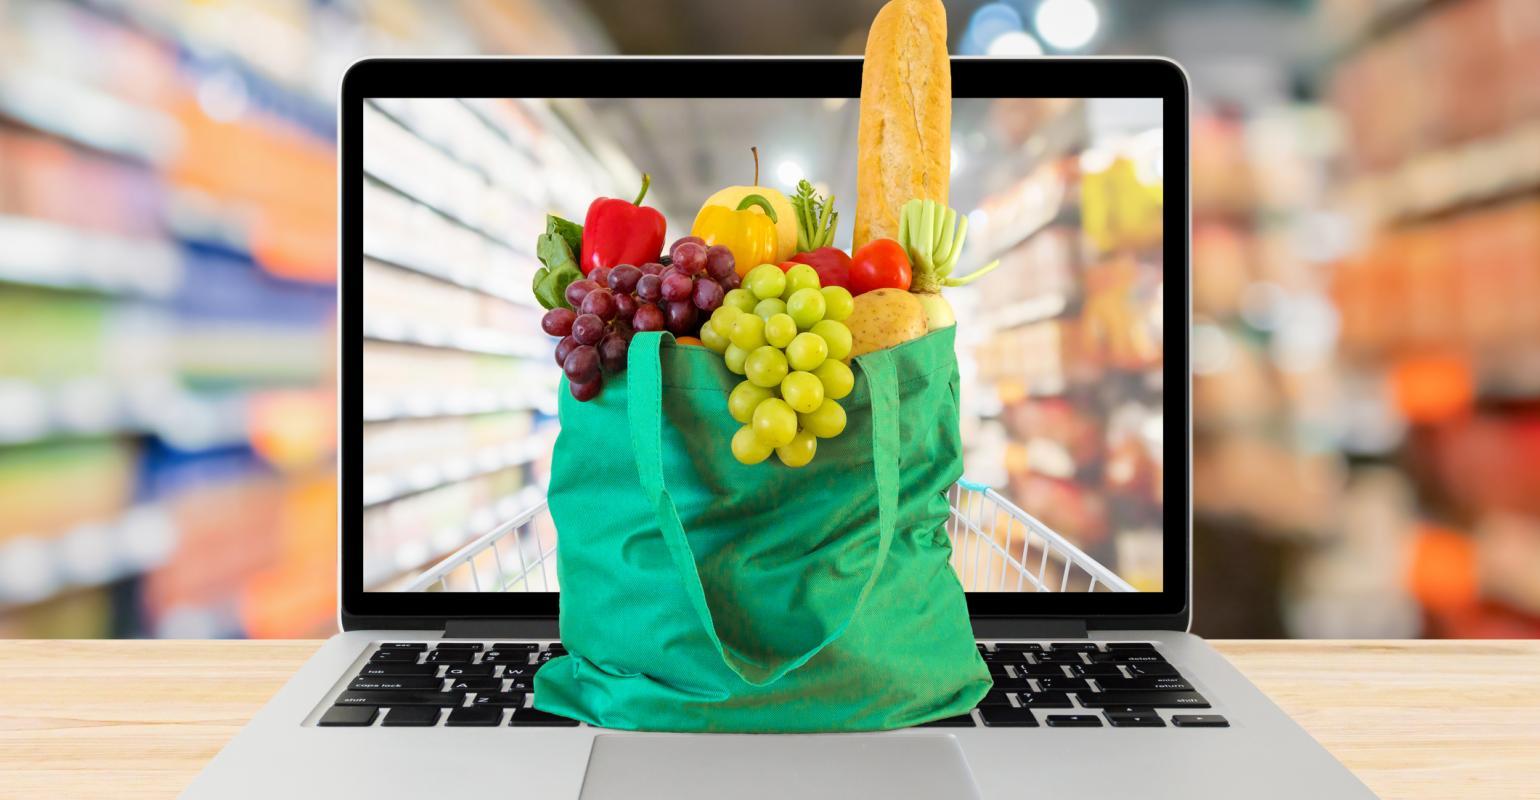 Indian Online Grocery Market Size, Share, Trends, Demand, Analysis, Growth and Forecast 2021-2026